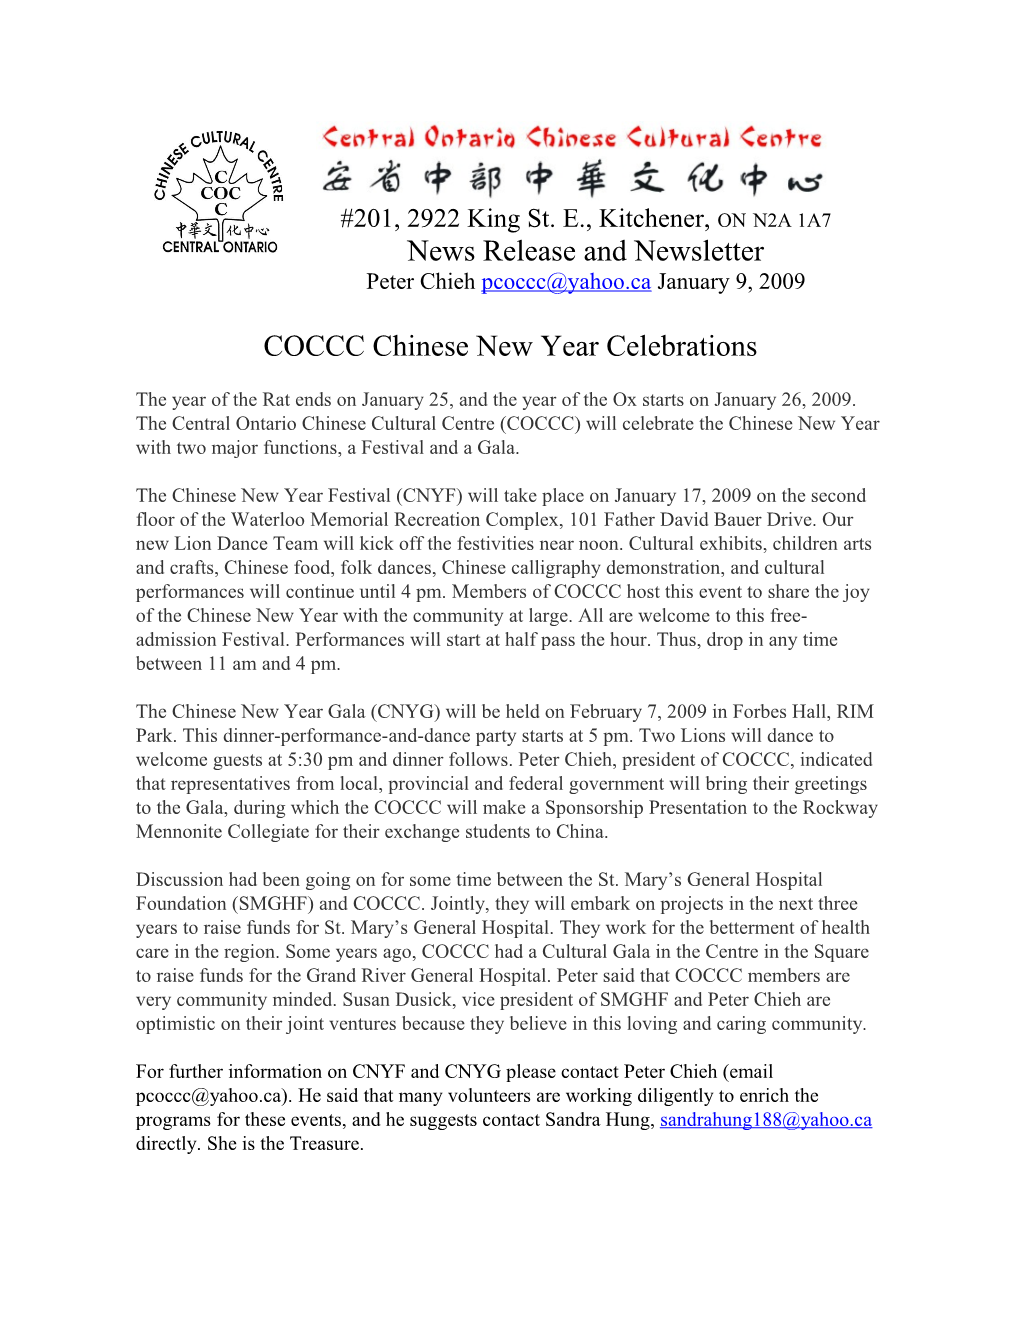 Central Ontario Chinese Cultural Center (COCCC) Notice